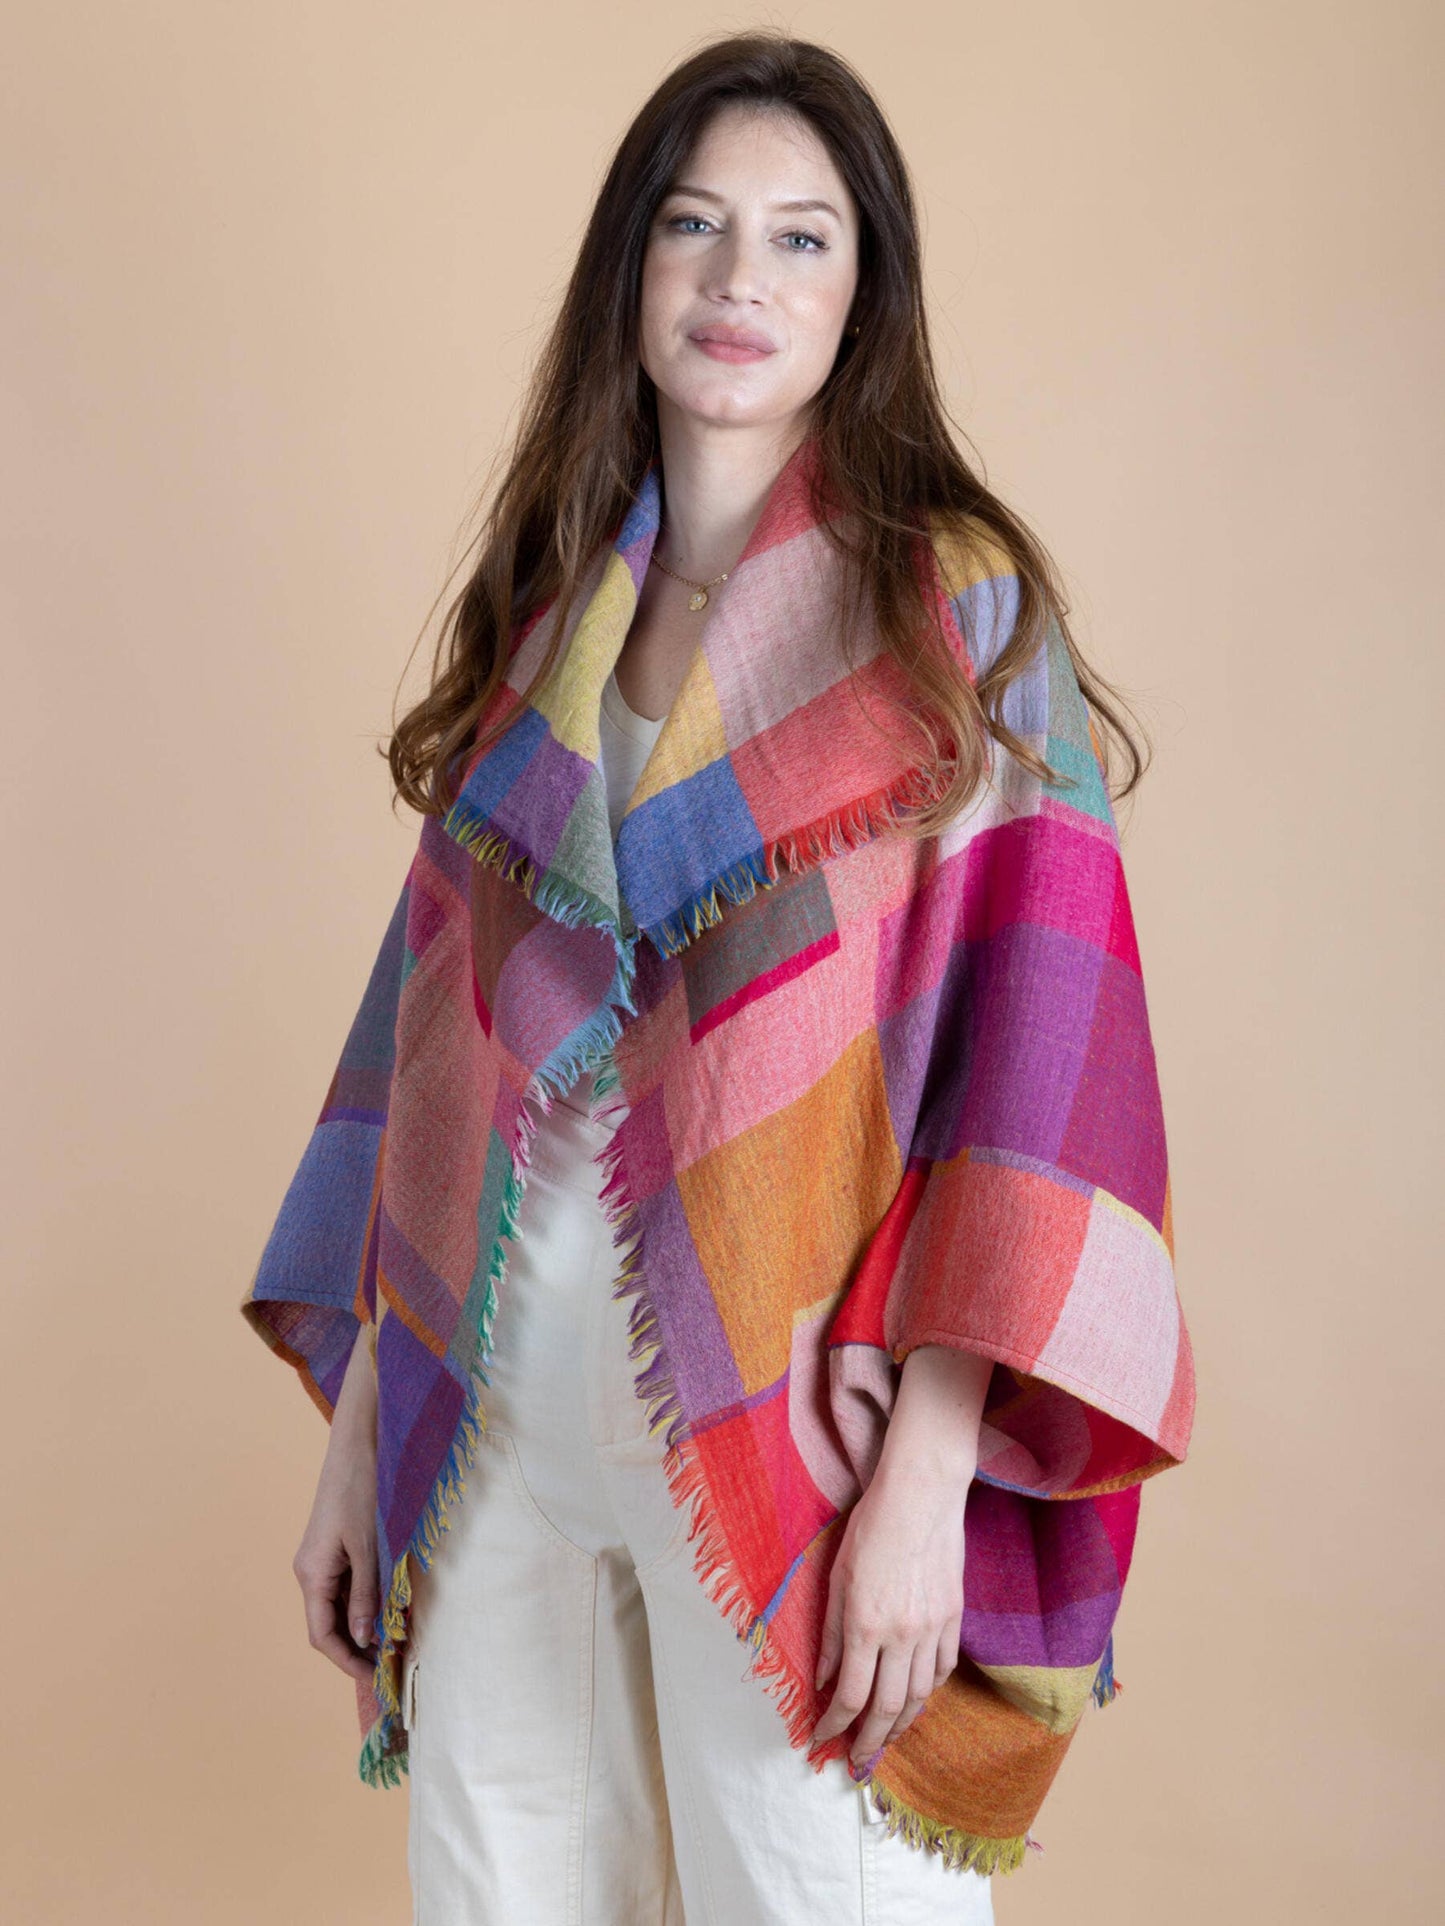 model is wearing an all white outfit with rainbow color-blocked wool poncho on top